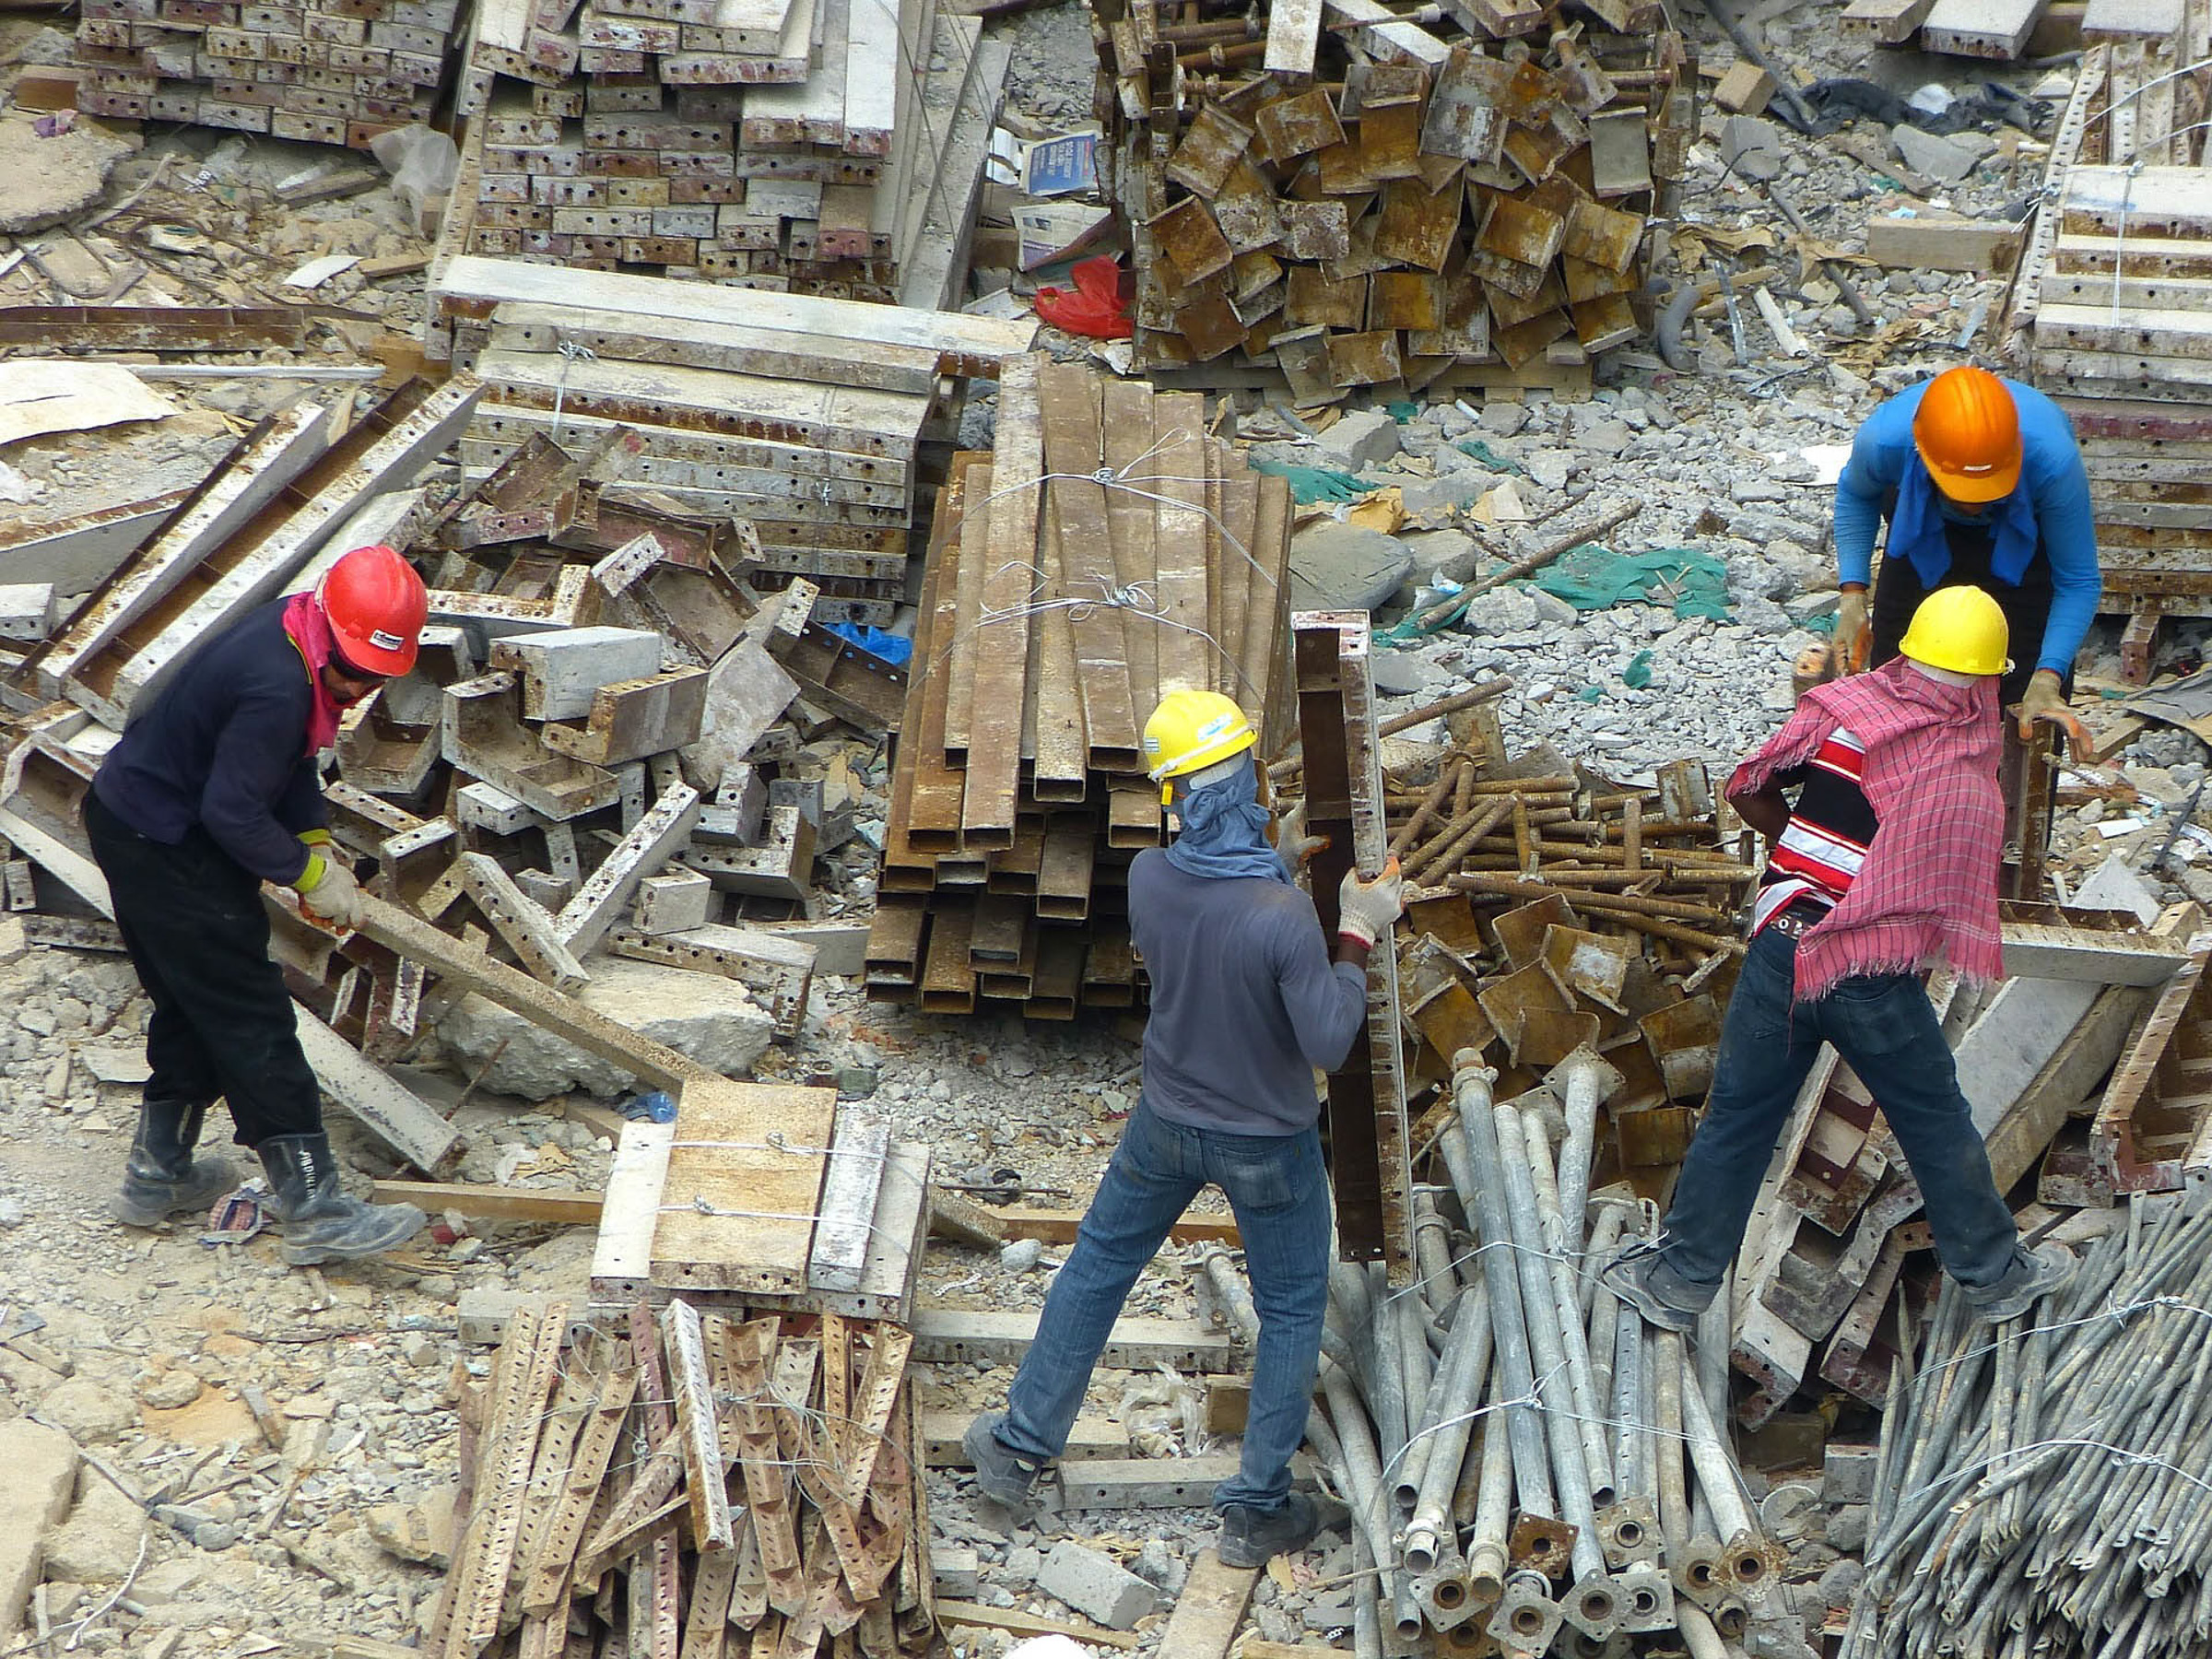 Group of people around a pile of rubble